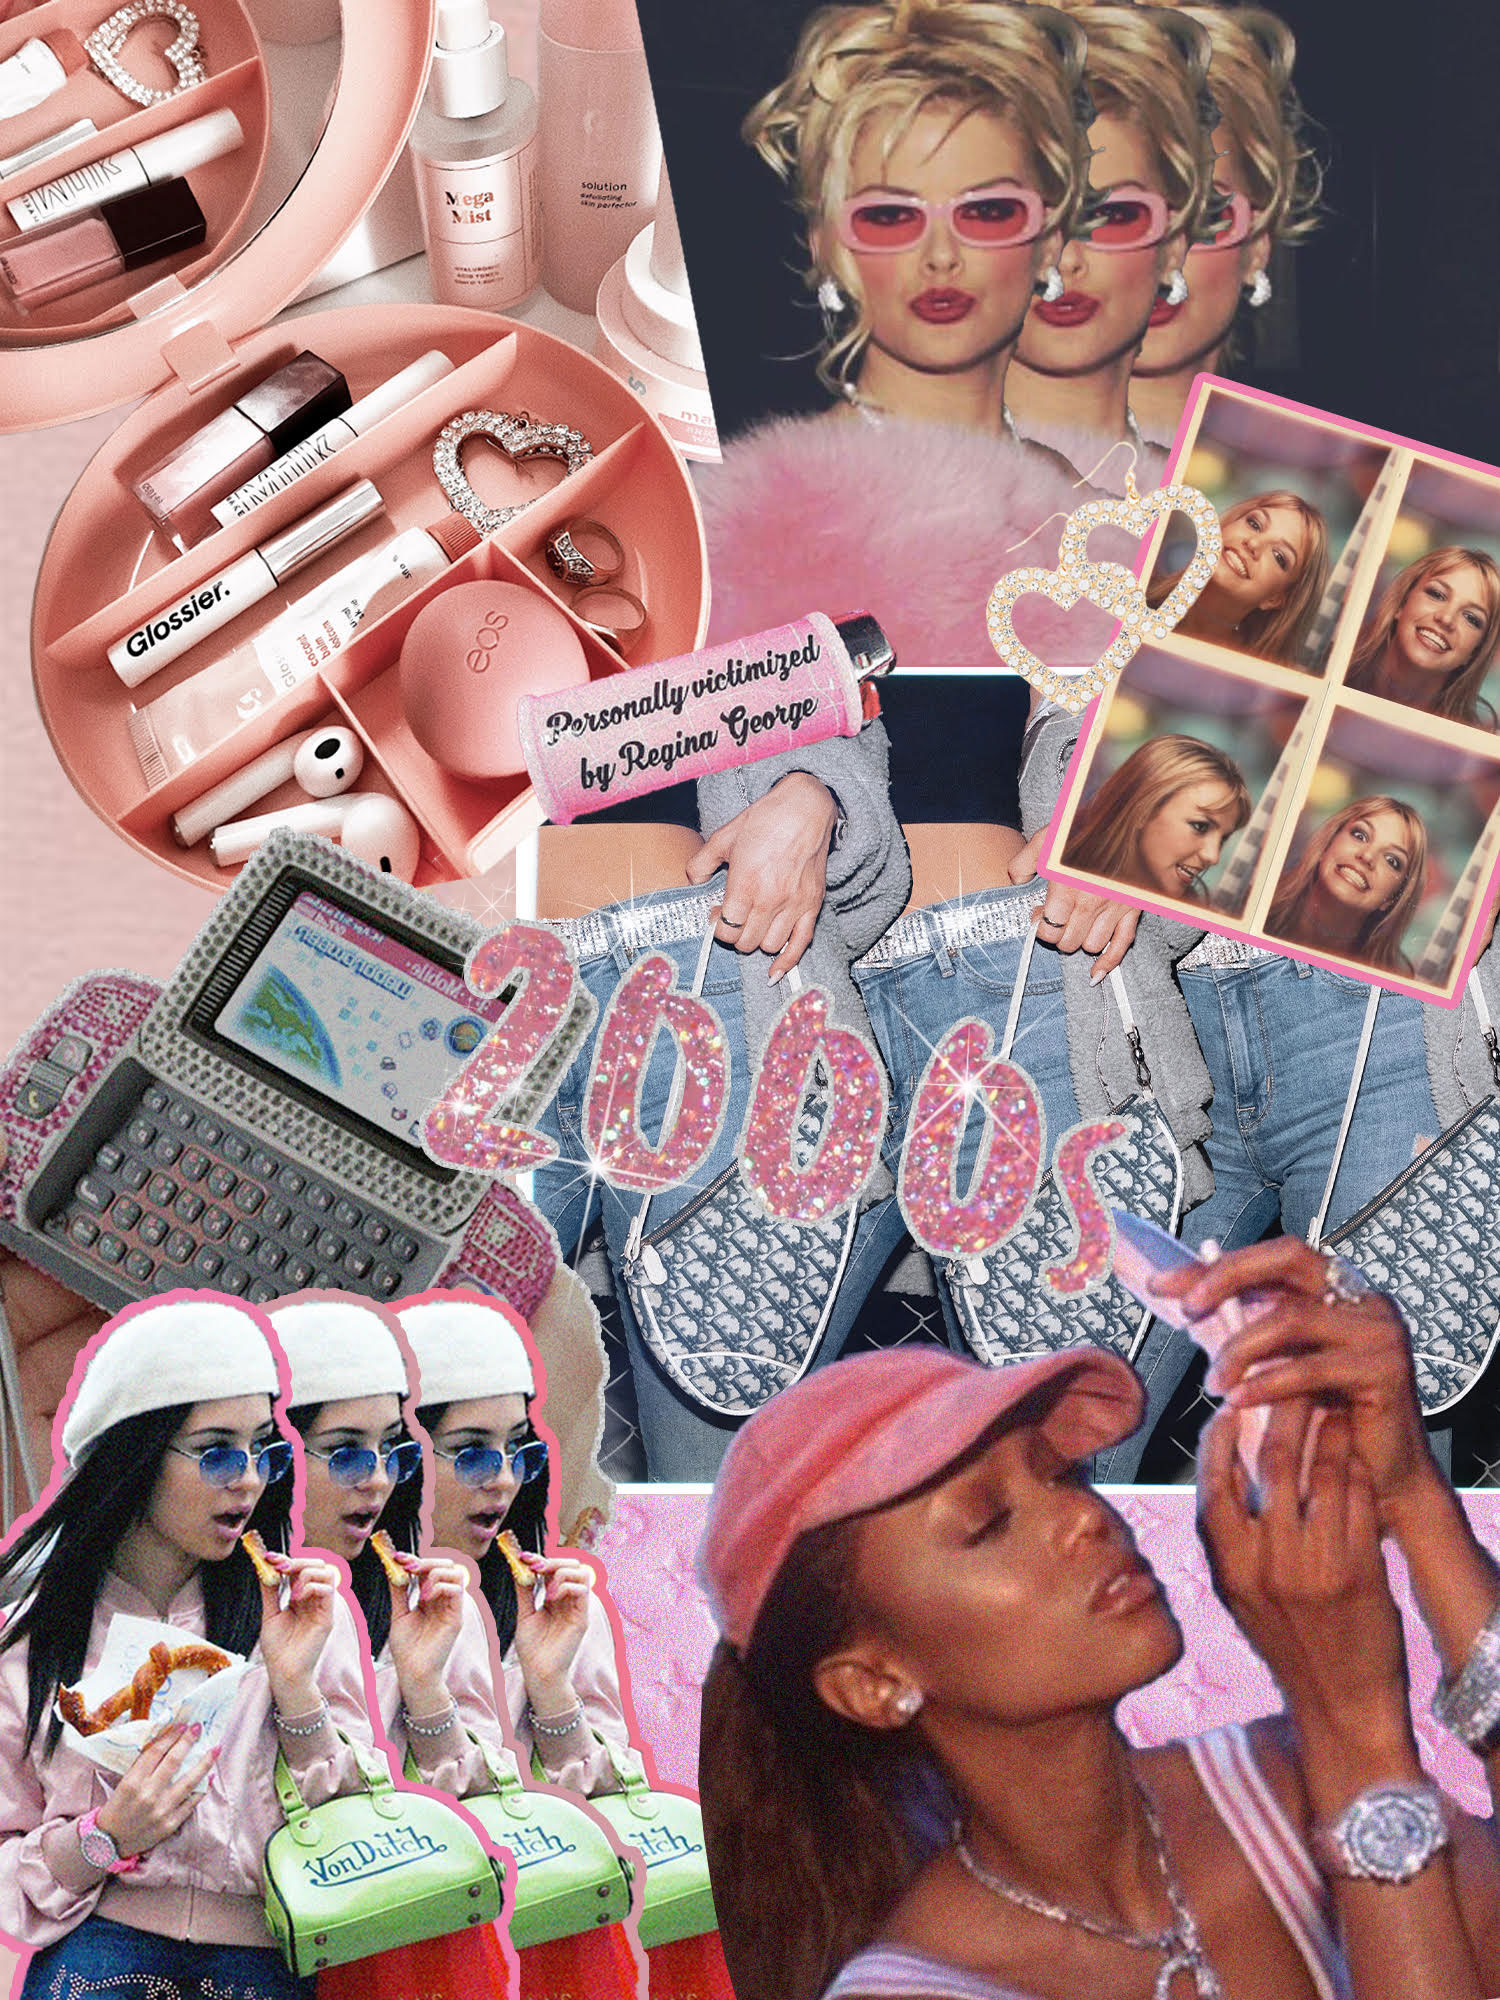 A collage of images from the 2000s including pink makeup, a pink phone, and a pink watch. - 2000s